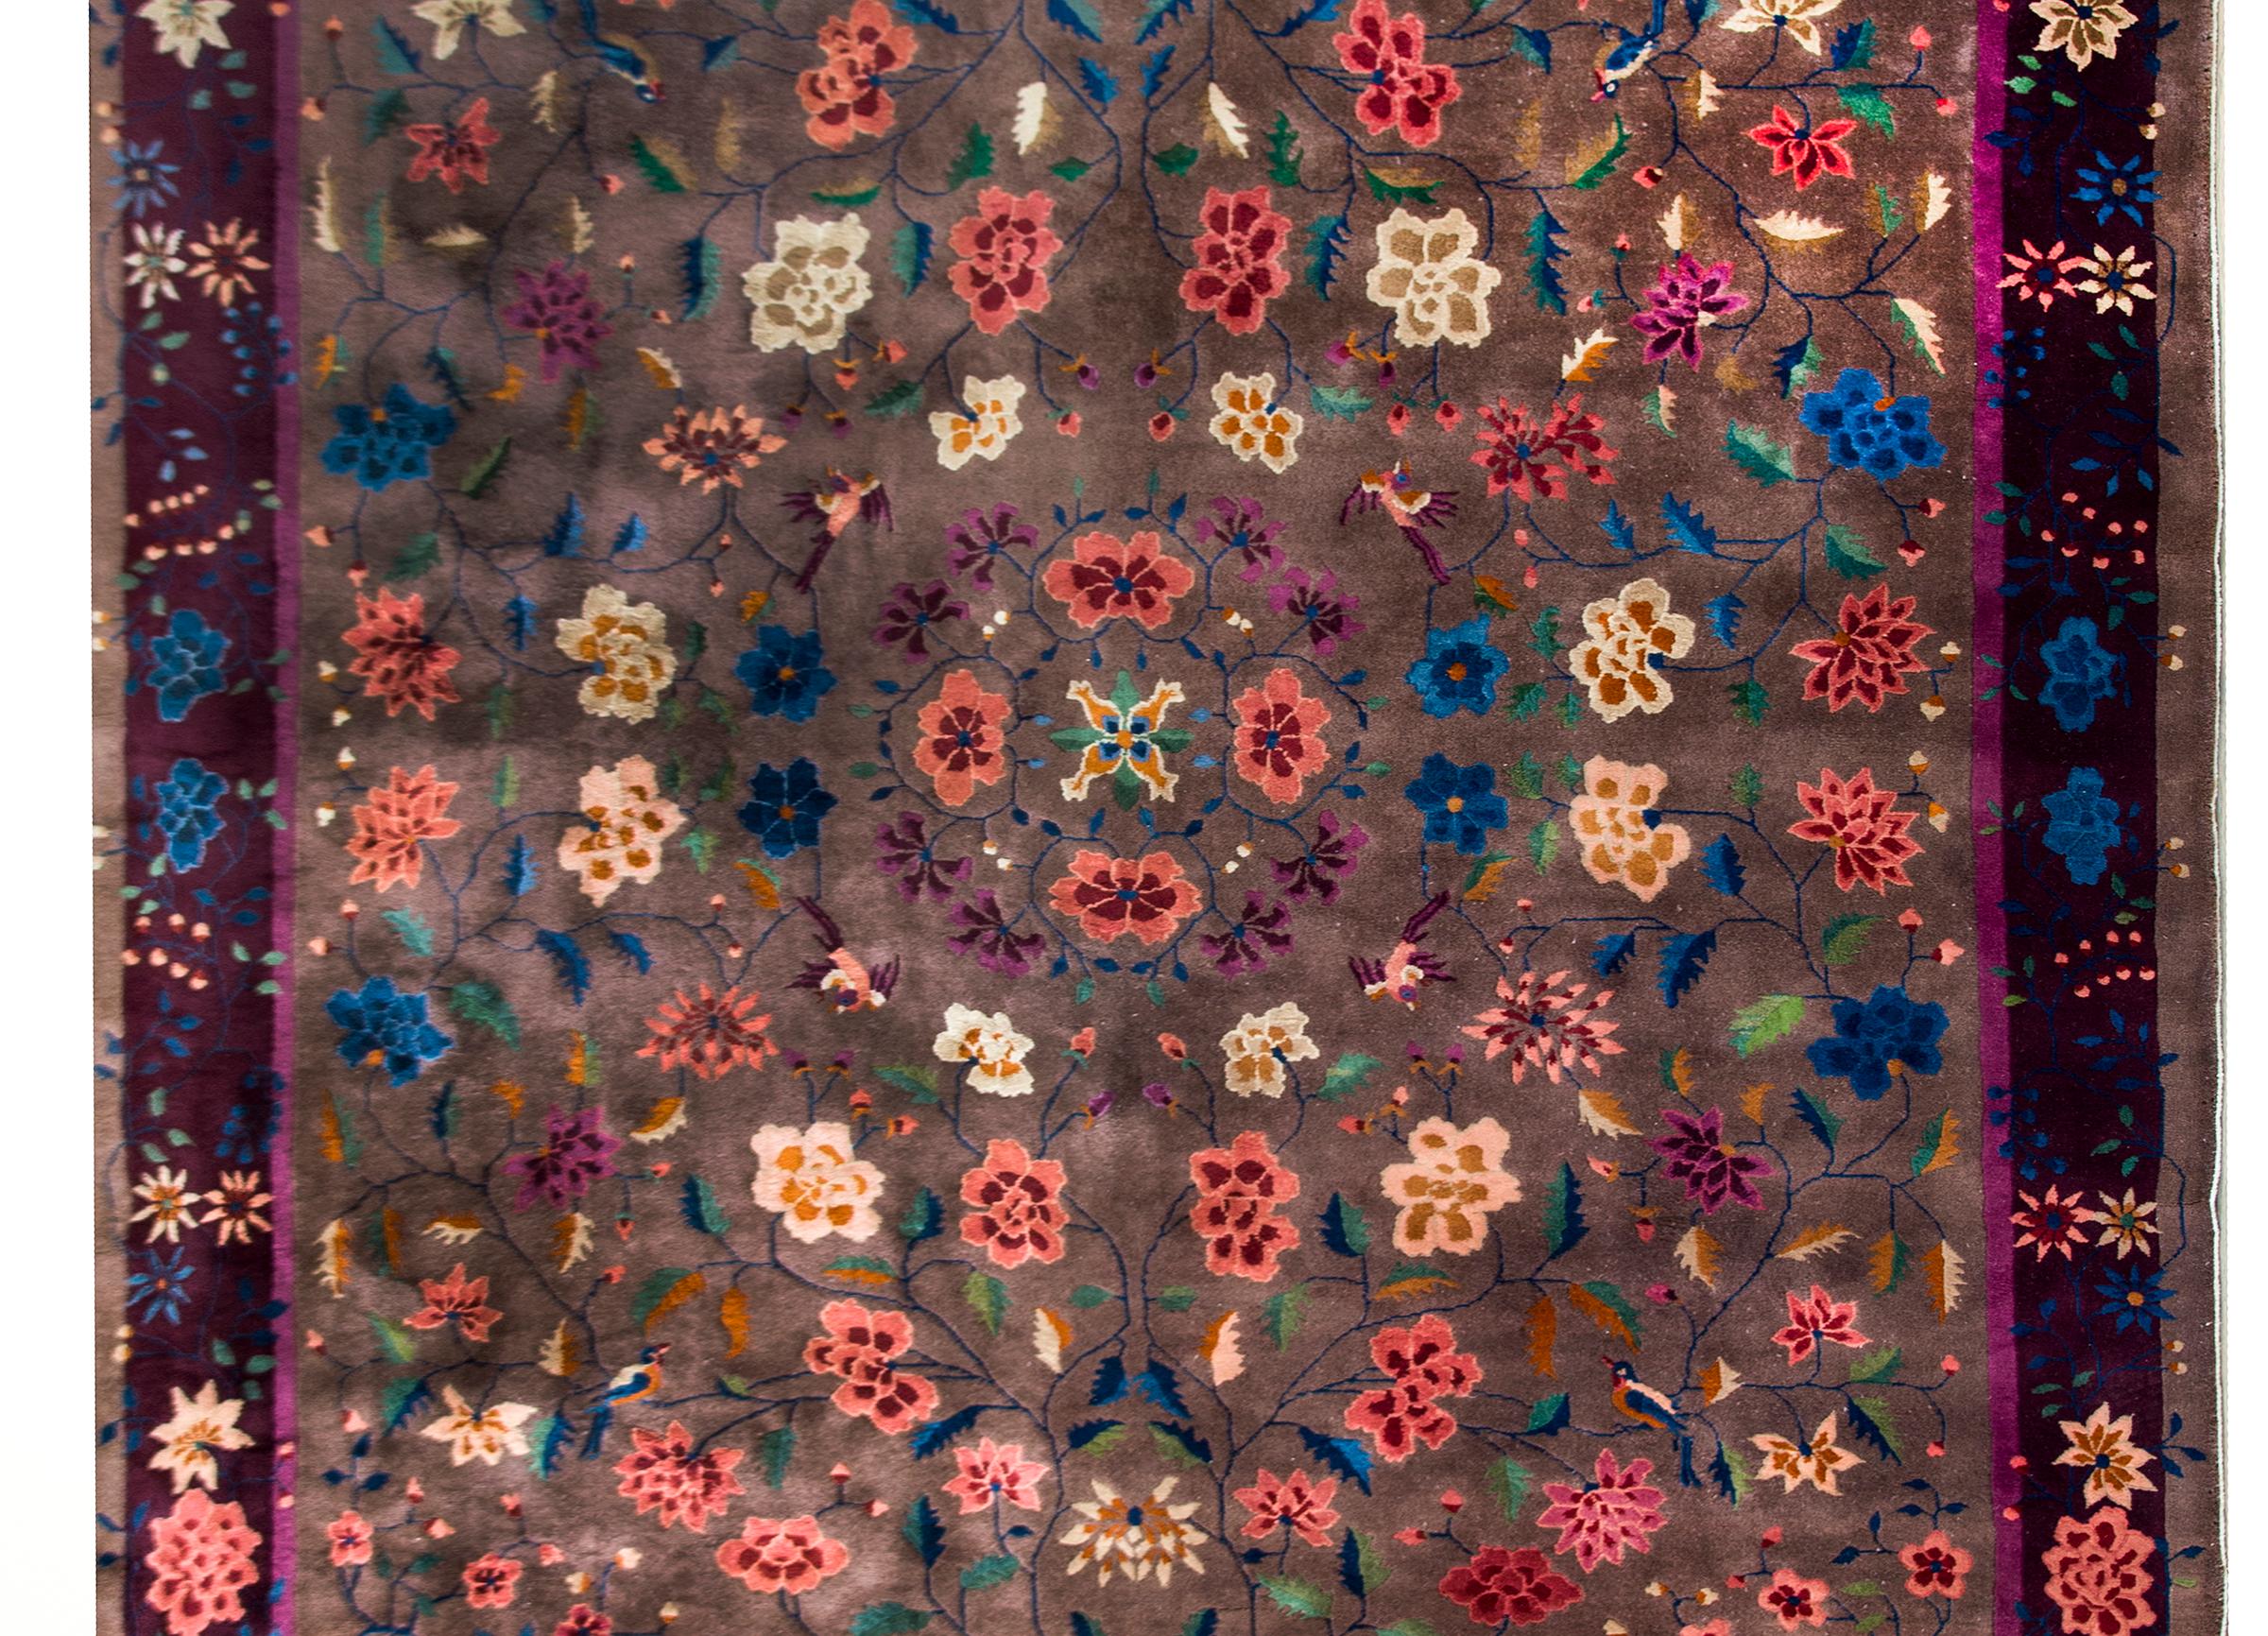 An unbelievable early 20th century Chinese Art Deco rug with a central peony medallion surrounded by even more peonies and chrysanthemum, all woven in a chic color palette of pink, violet, indigo, orange, and yellow, and set against a sophisticated